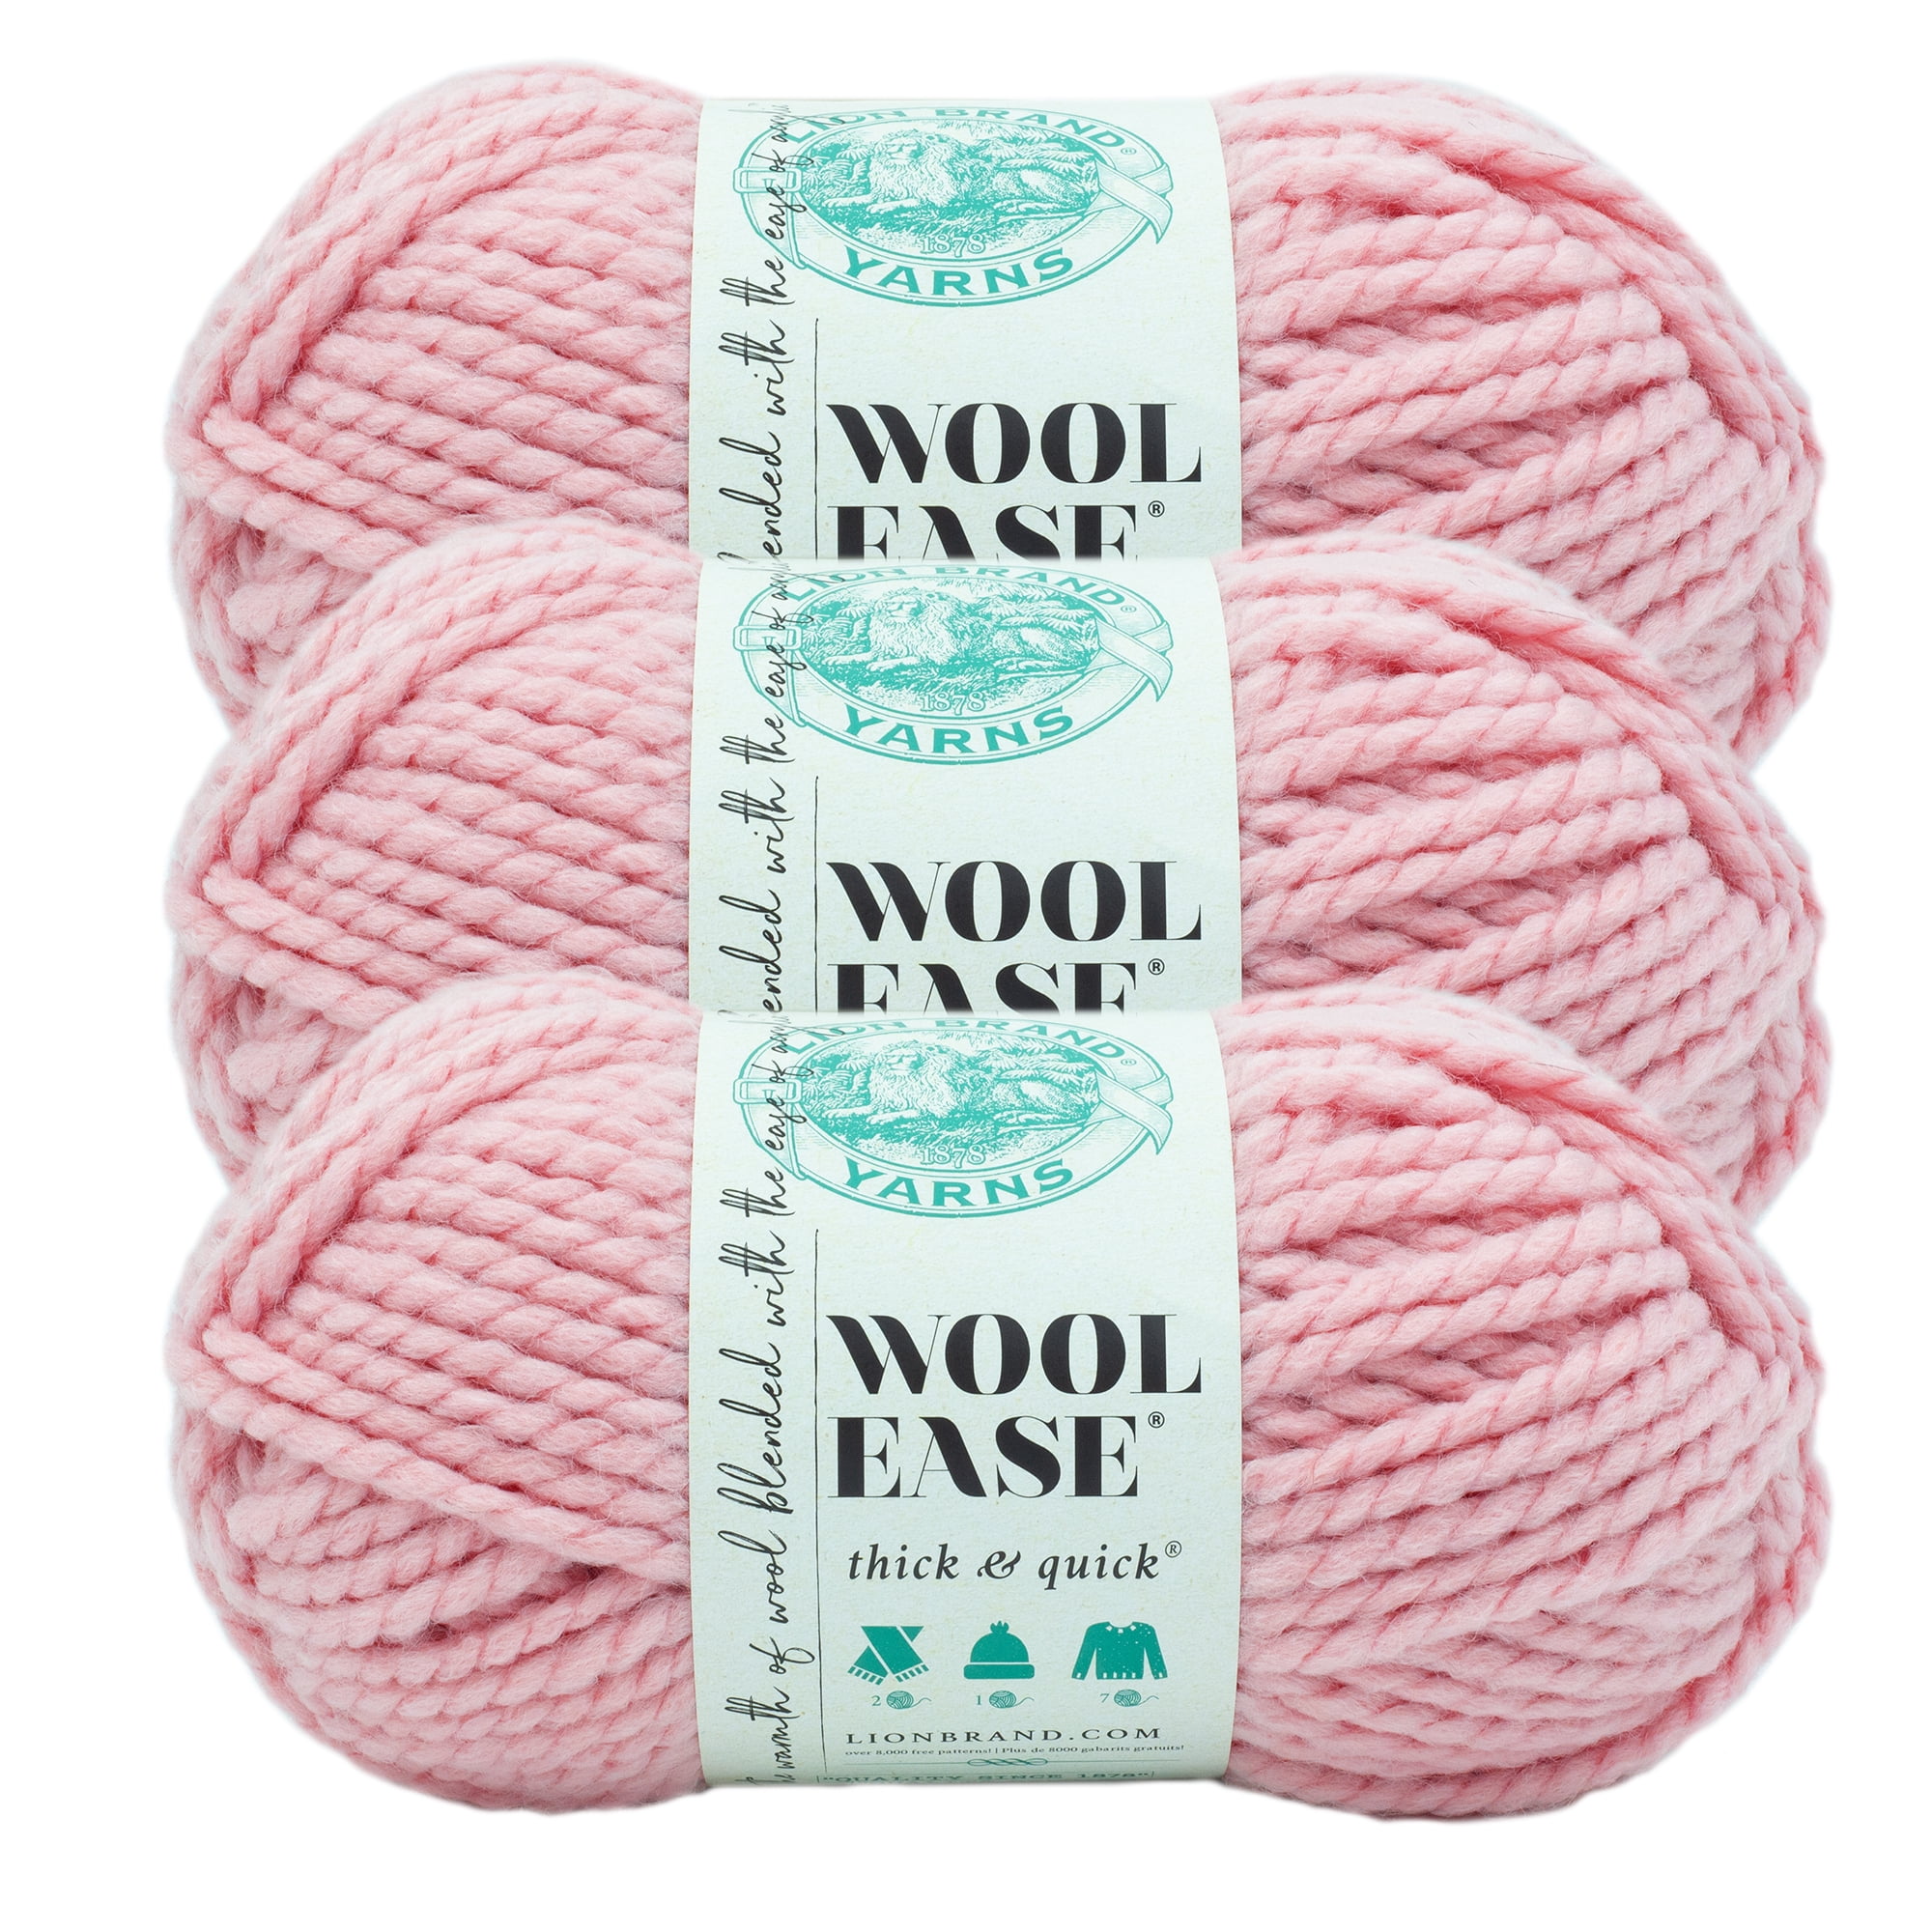 Lion Brand Yarn Wool-Ease Thick & Quick Yarn, Soft and Bulky Yarn for  Knitting, Crocheting, and Crafting, 3 Pack, Wheat